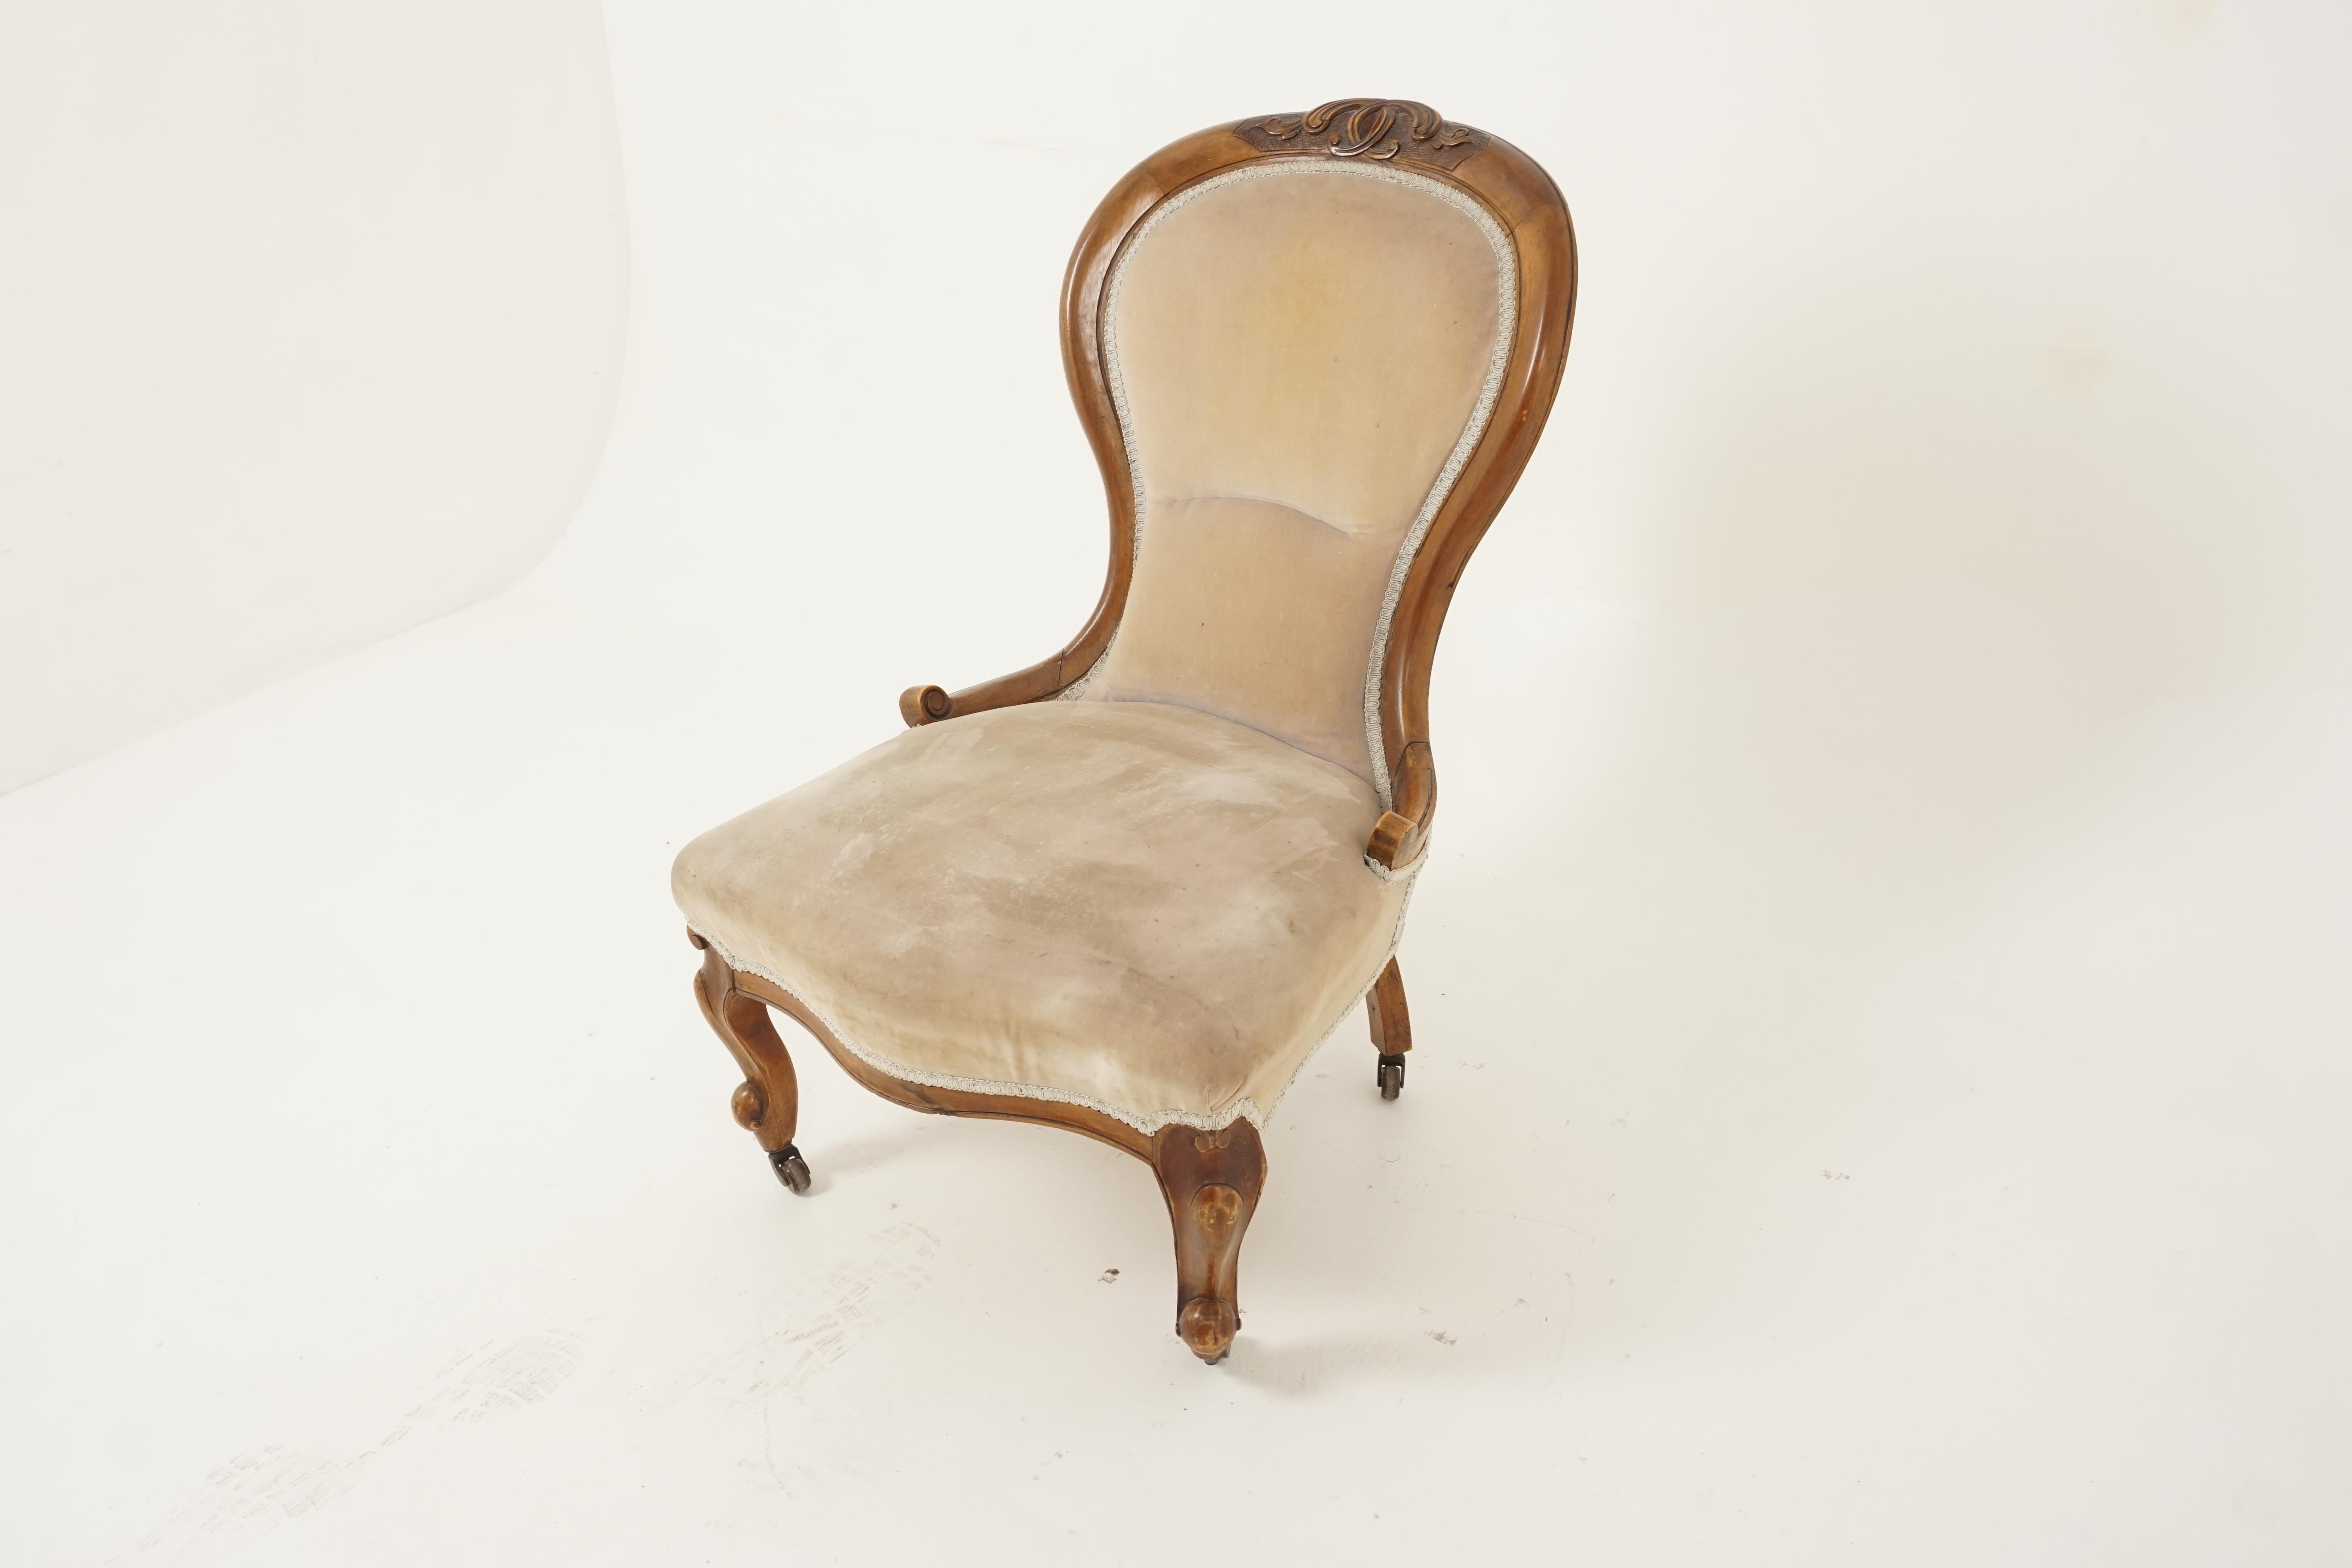 Antique Victorian chair, walnut, spoon back, women's parlour chair, Scotland 1870, H283

Scotland 1870
Solid walnut
Original finish
Carved cartouche to the center of the top rail
Upholstered back with carved supports
Standing on carved cabriole